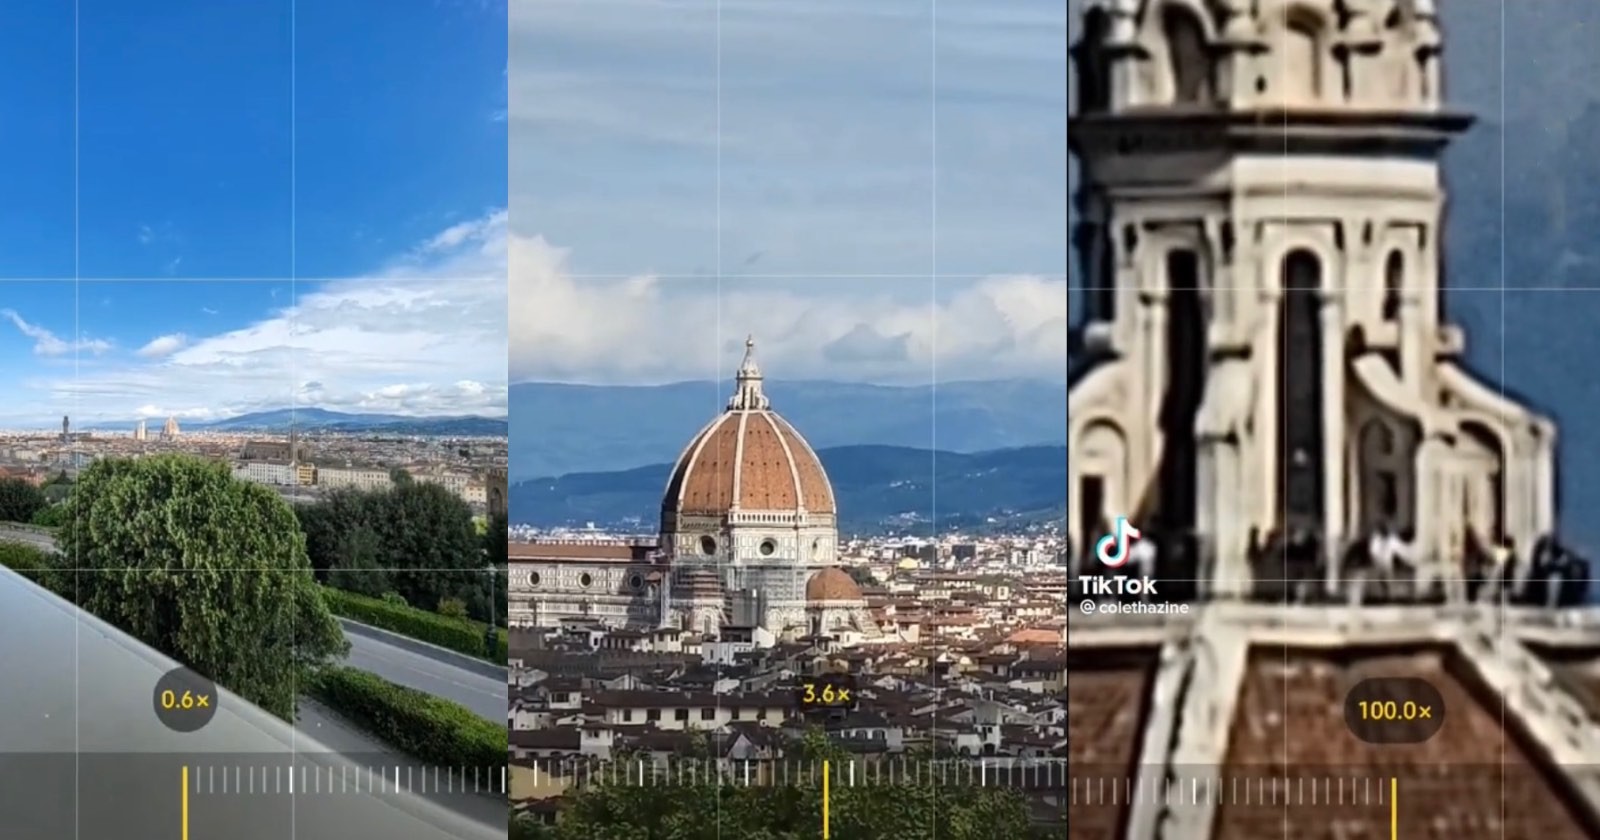  video florence cathedral sparks debate samsung 100x space 